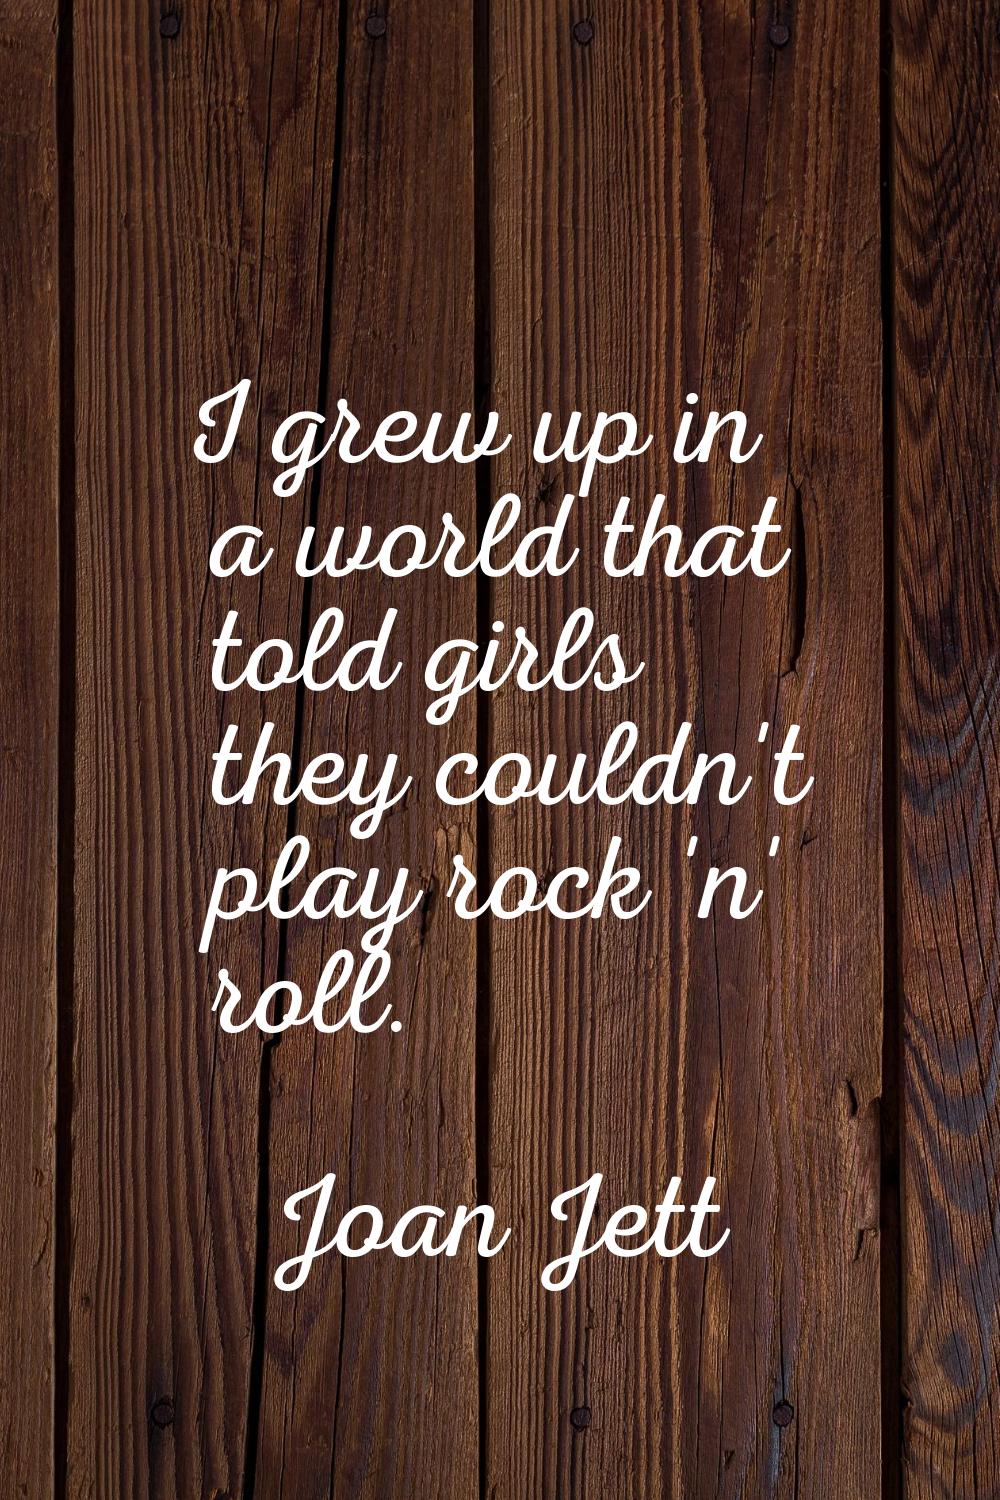 I grew up in a world that told girls they couldn't play rock 'n' roll.